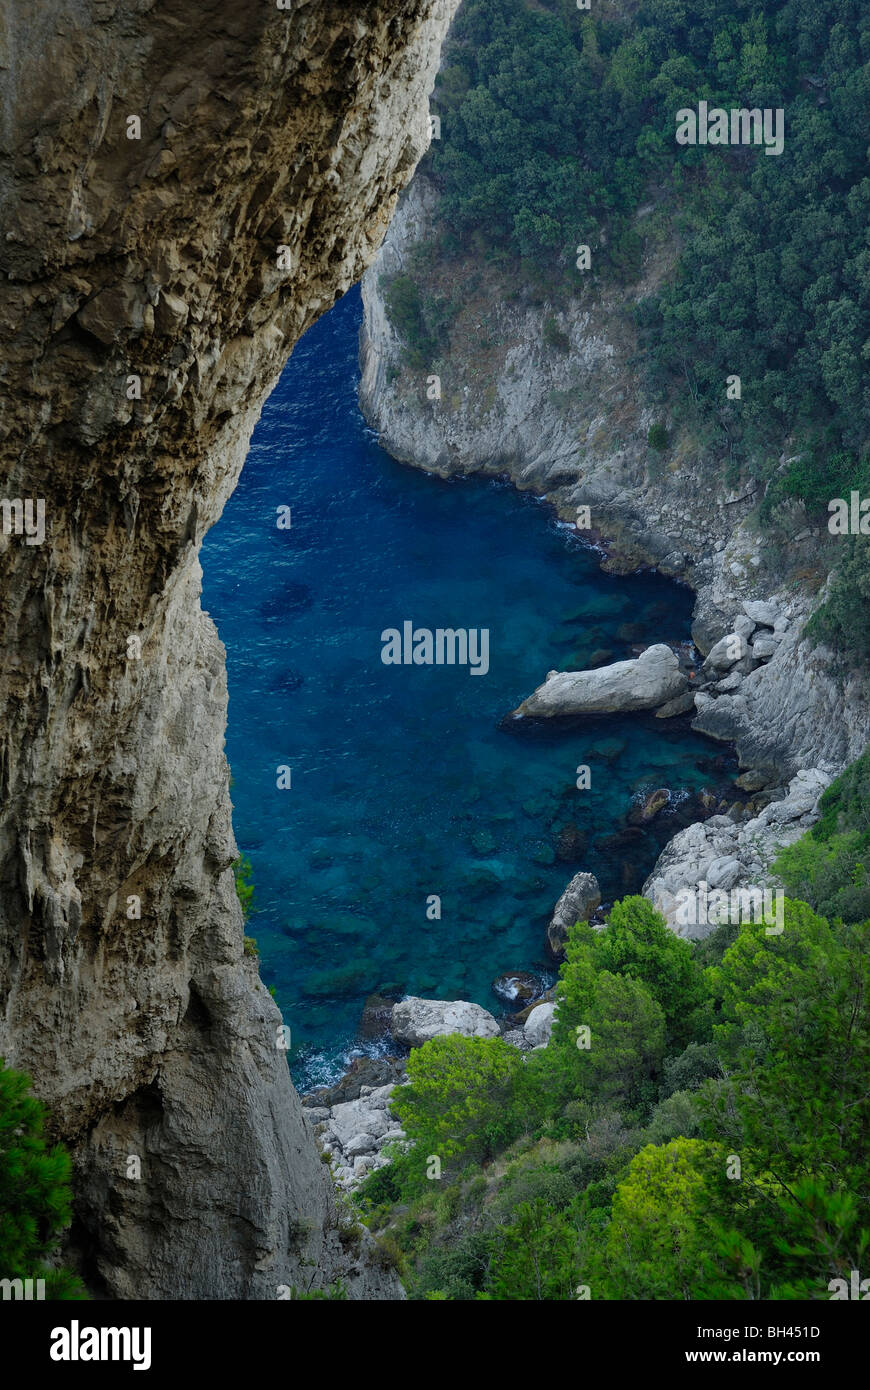 Arco Naturale is Natural Arch on Coast of Capri Island, Italy Stock Image -  Image of bright, blue: 121773815